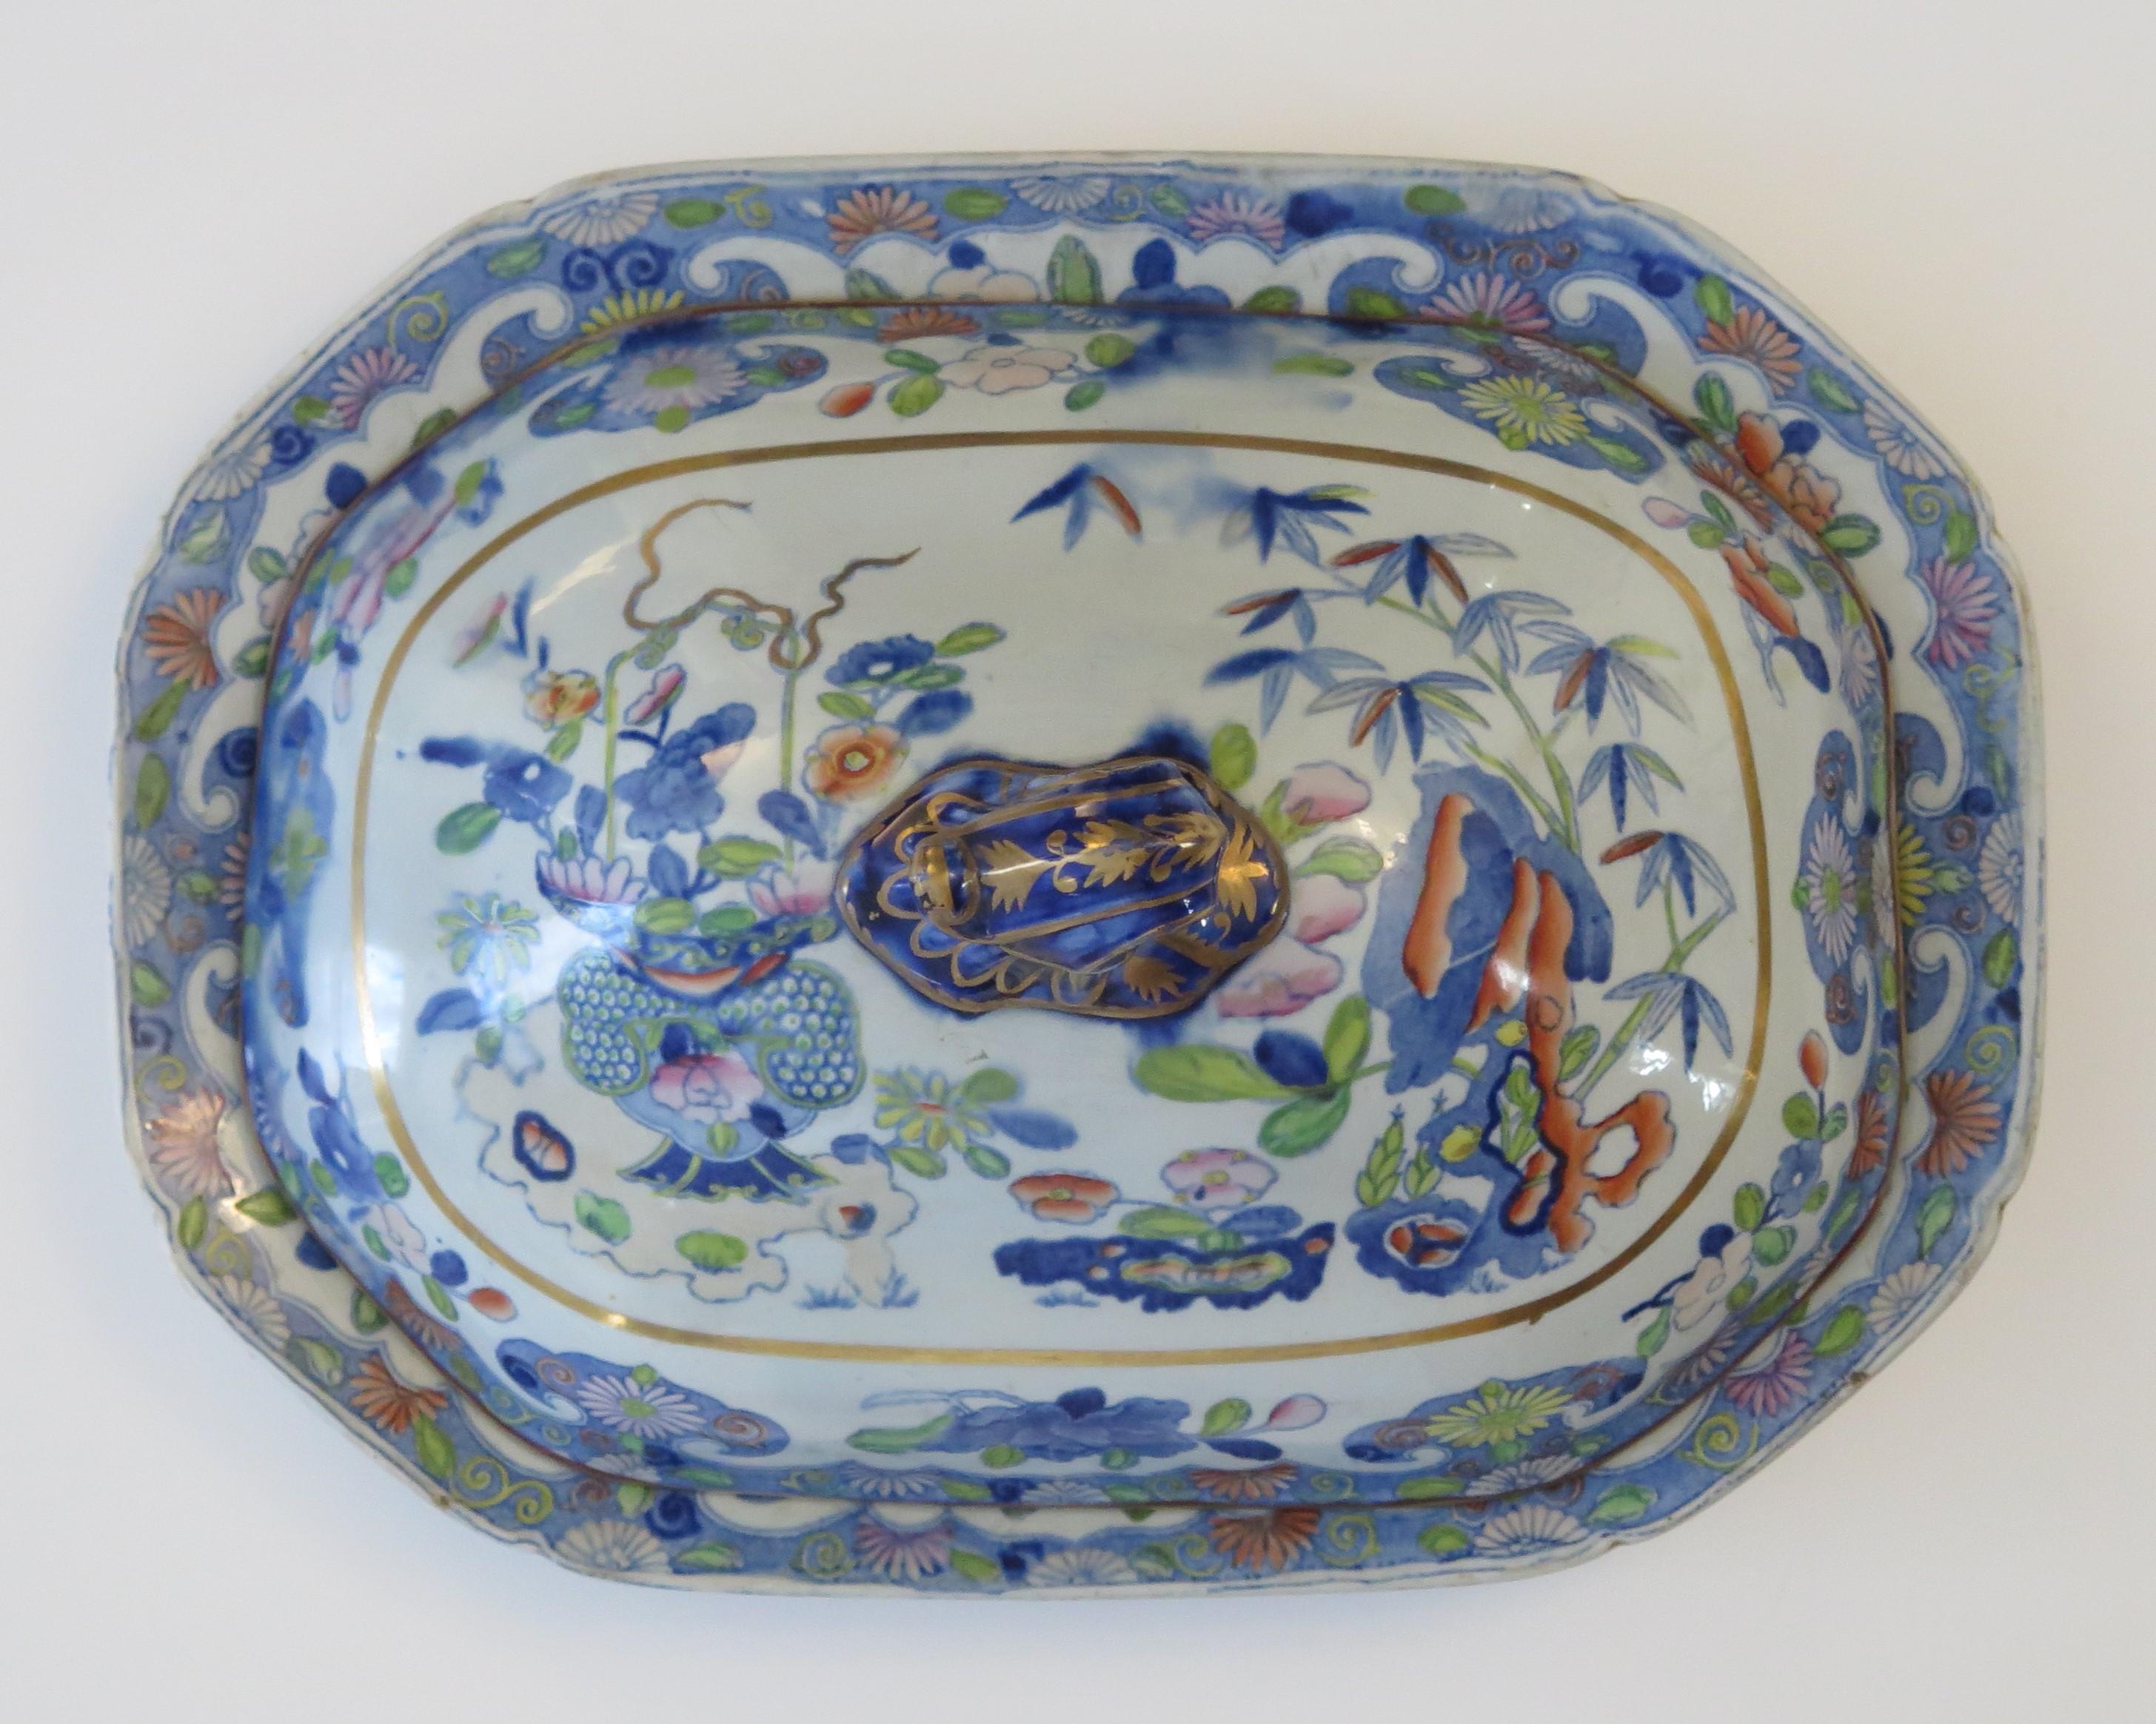 This is a very decorative ironstone serving dish or plate complete with lid or cover, made by Mason's of Lane Delph, Staffordshire, England, during the early part of the 19th century, circa 1820.

Both pieces are well potted. The plate or dish has